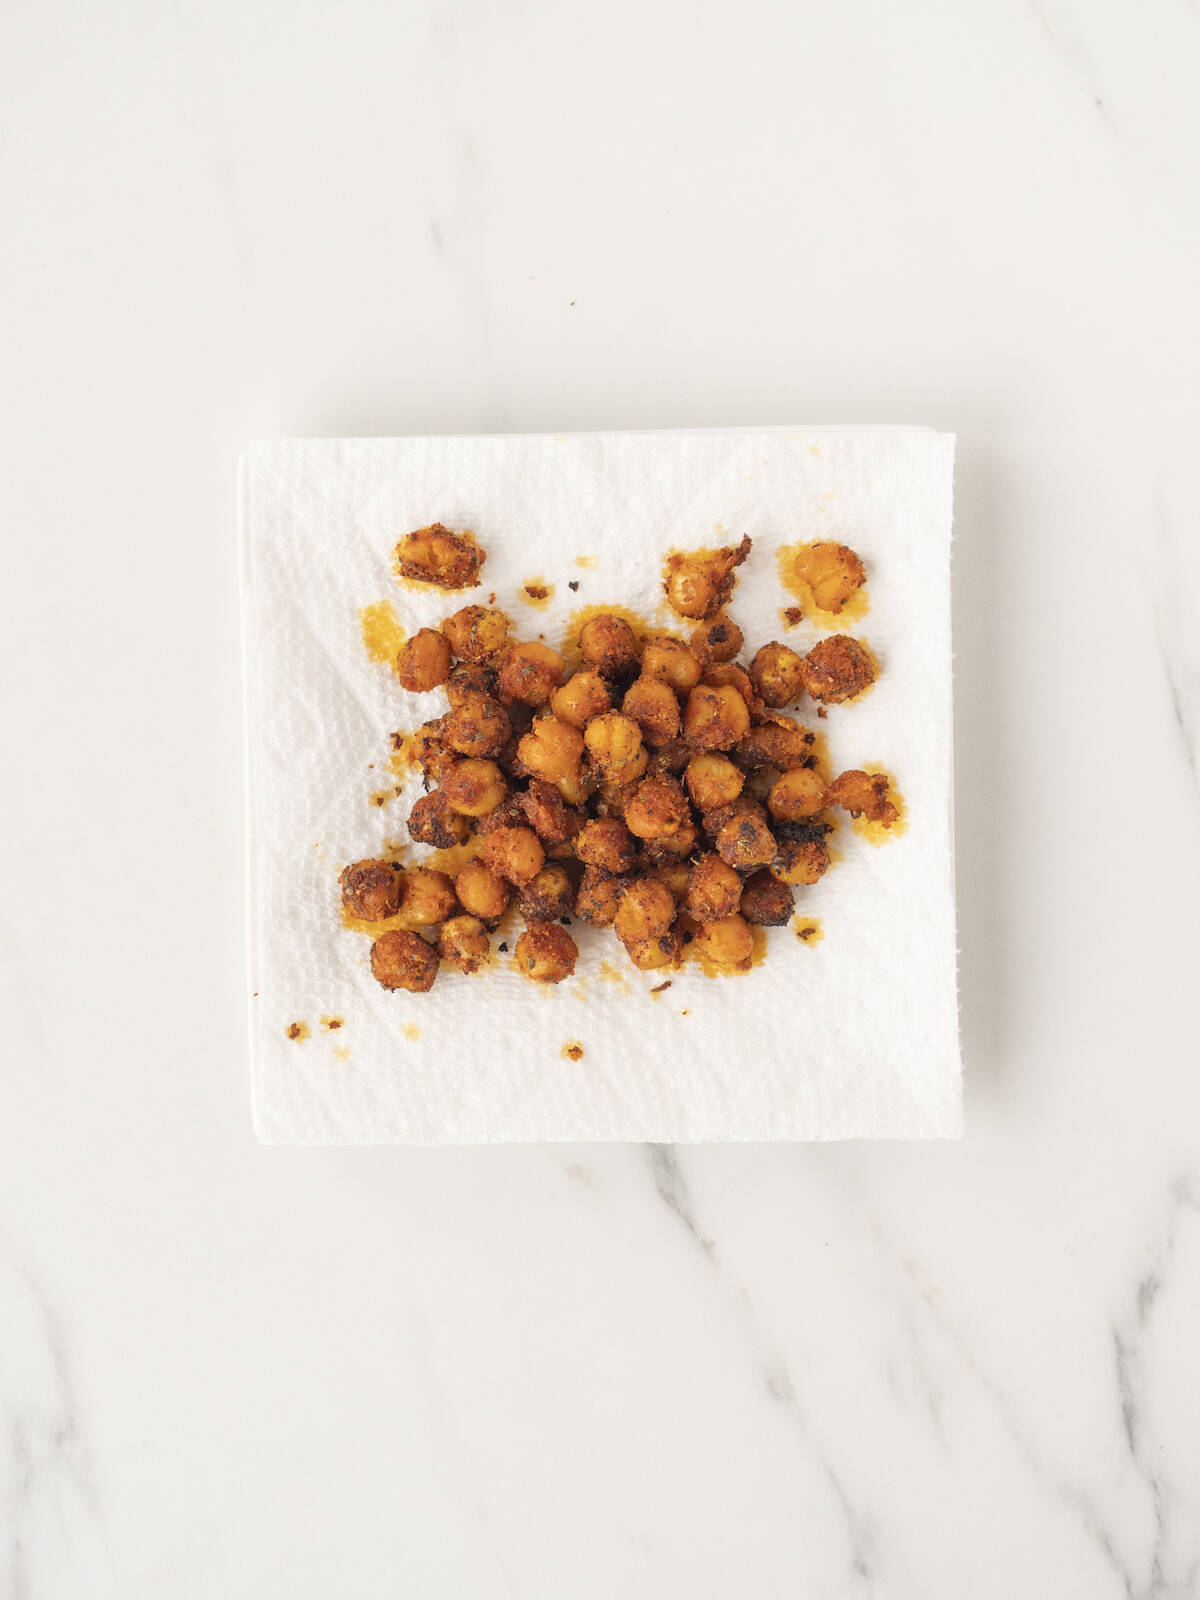 A paper towel with crispy chickpeas that have been just baked in the oven.